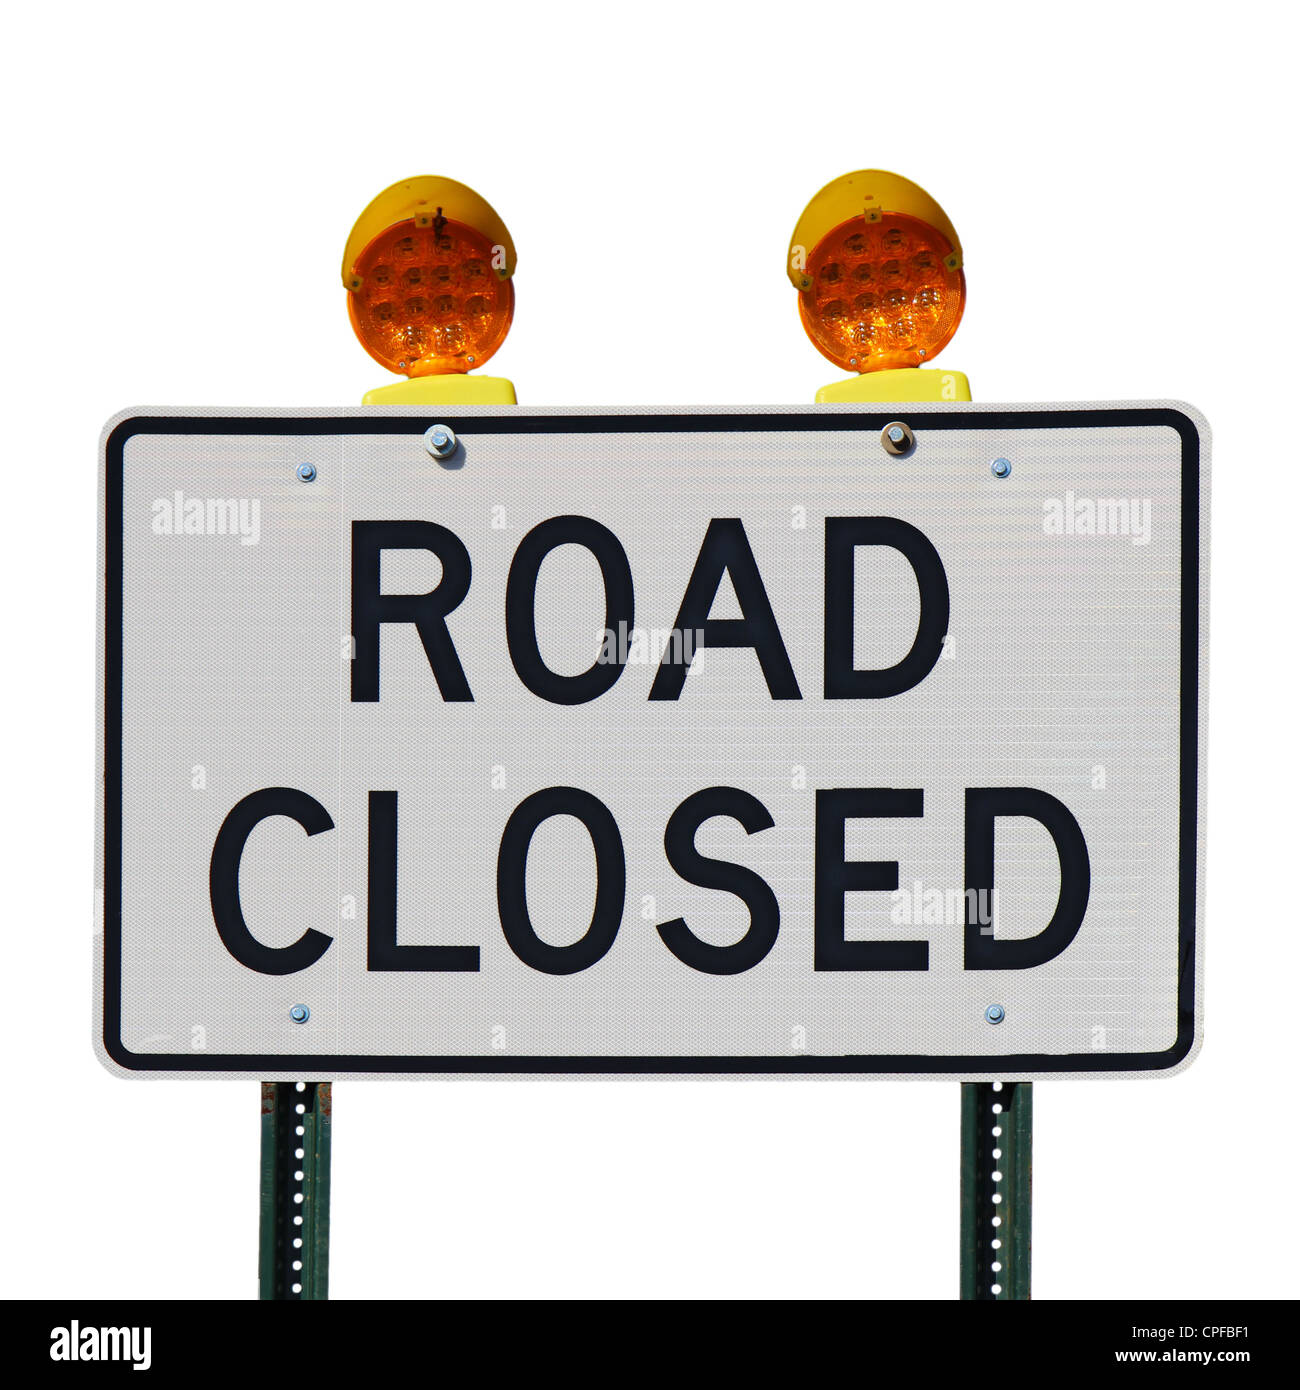 Road closed sign with orange lights against a white background square Stock Photo